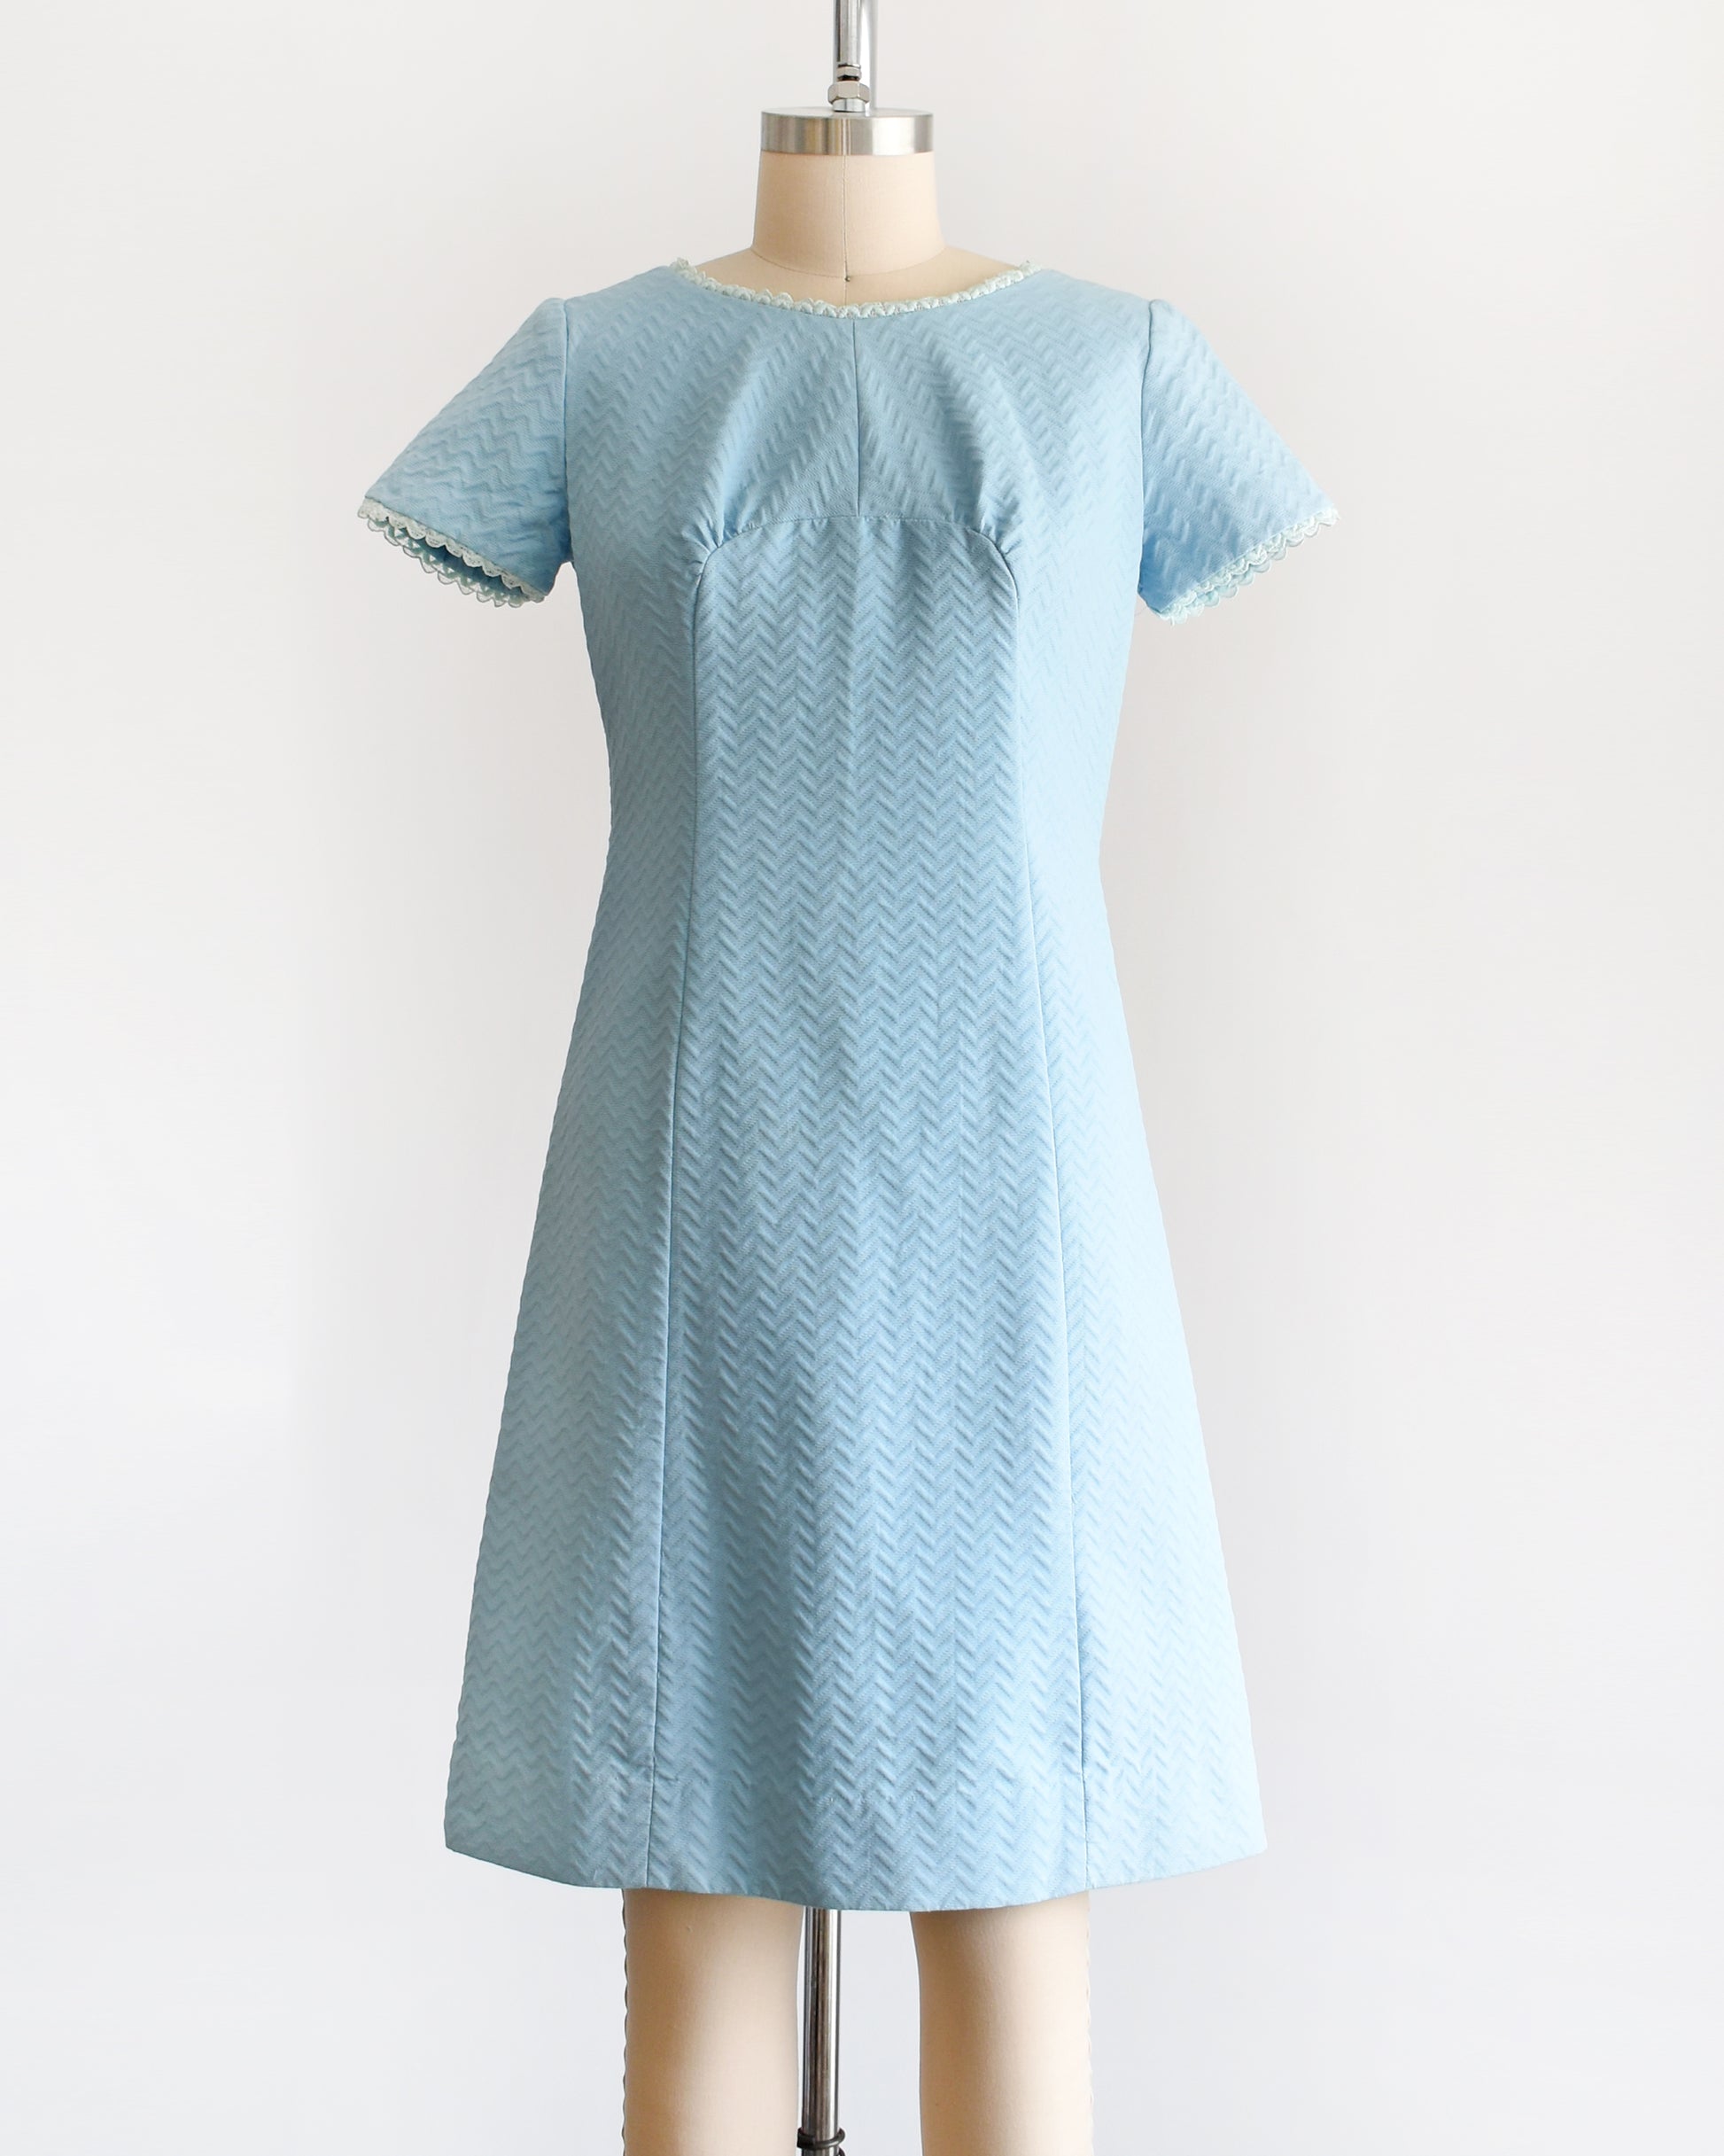 A vintage 1960s mod dress that has textured light blue chevron striped knit with alternating ribbing. 